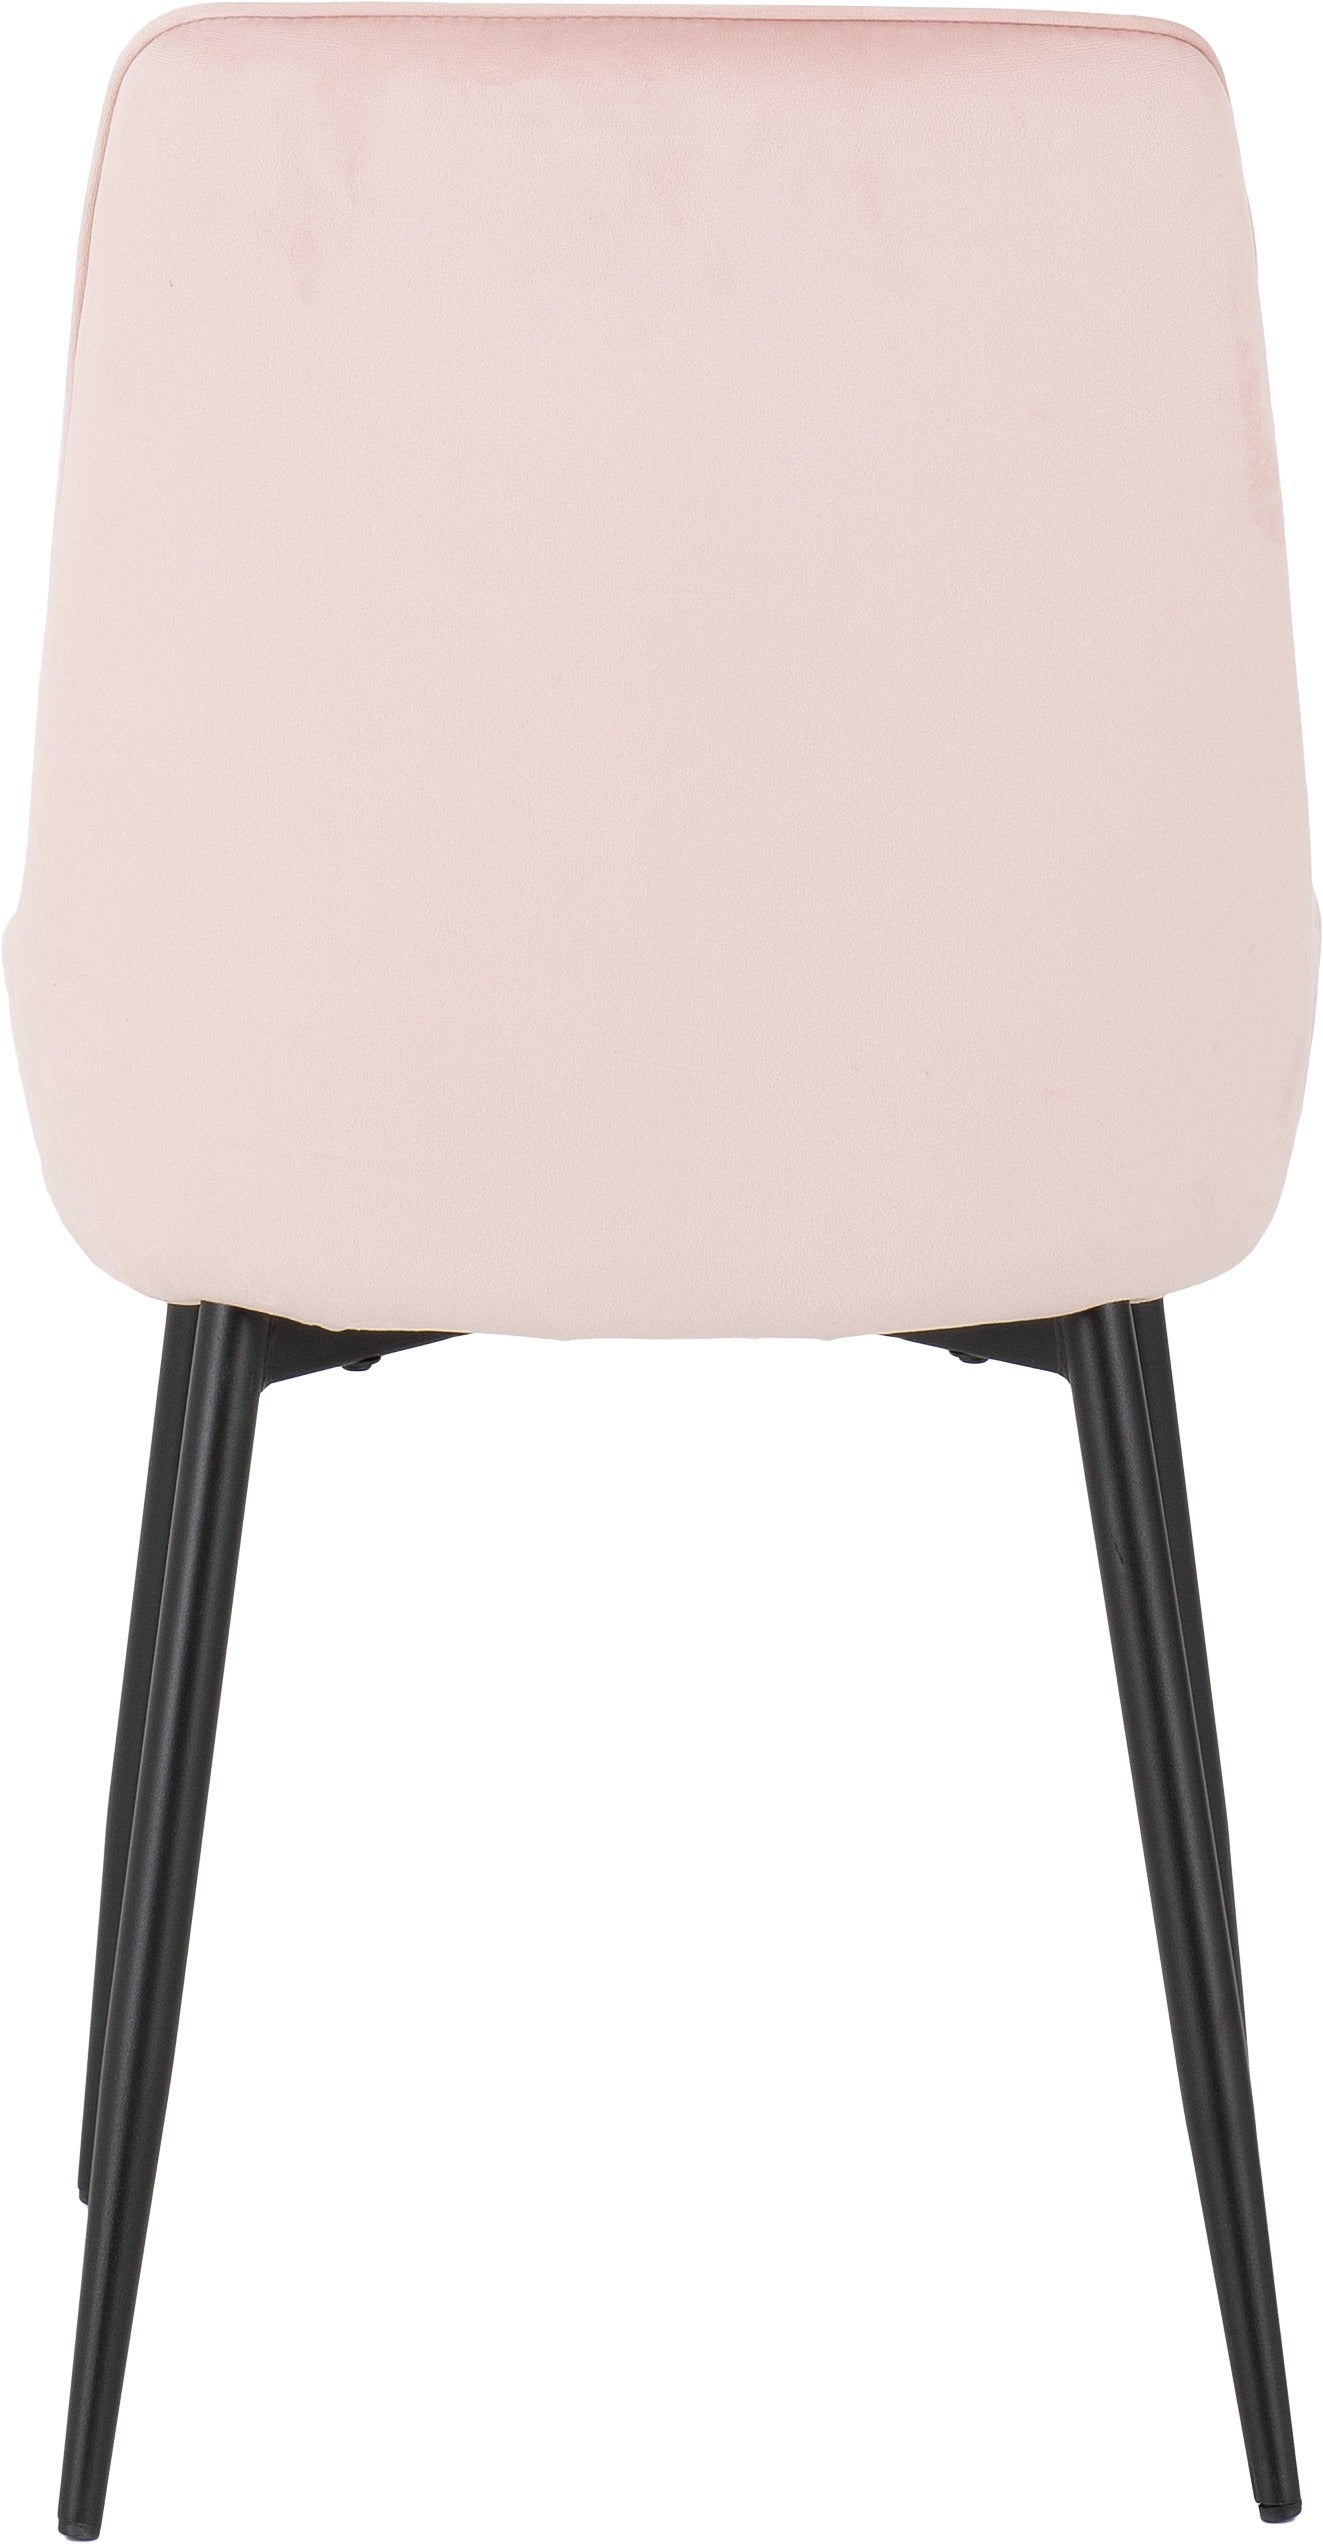 Avery Chair Baby Pink Velvet - The Right Buy Store